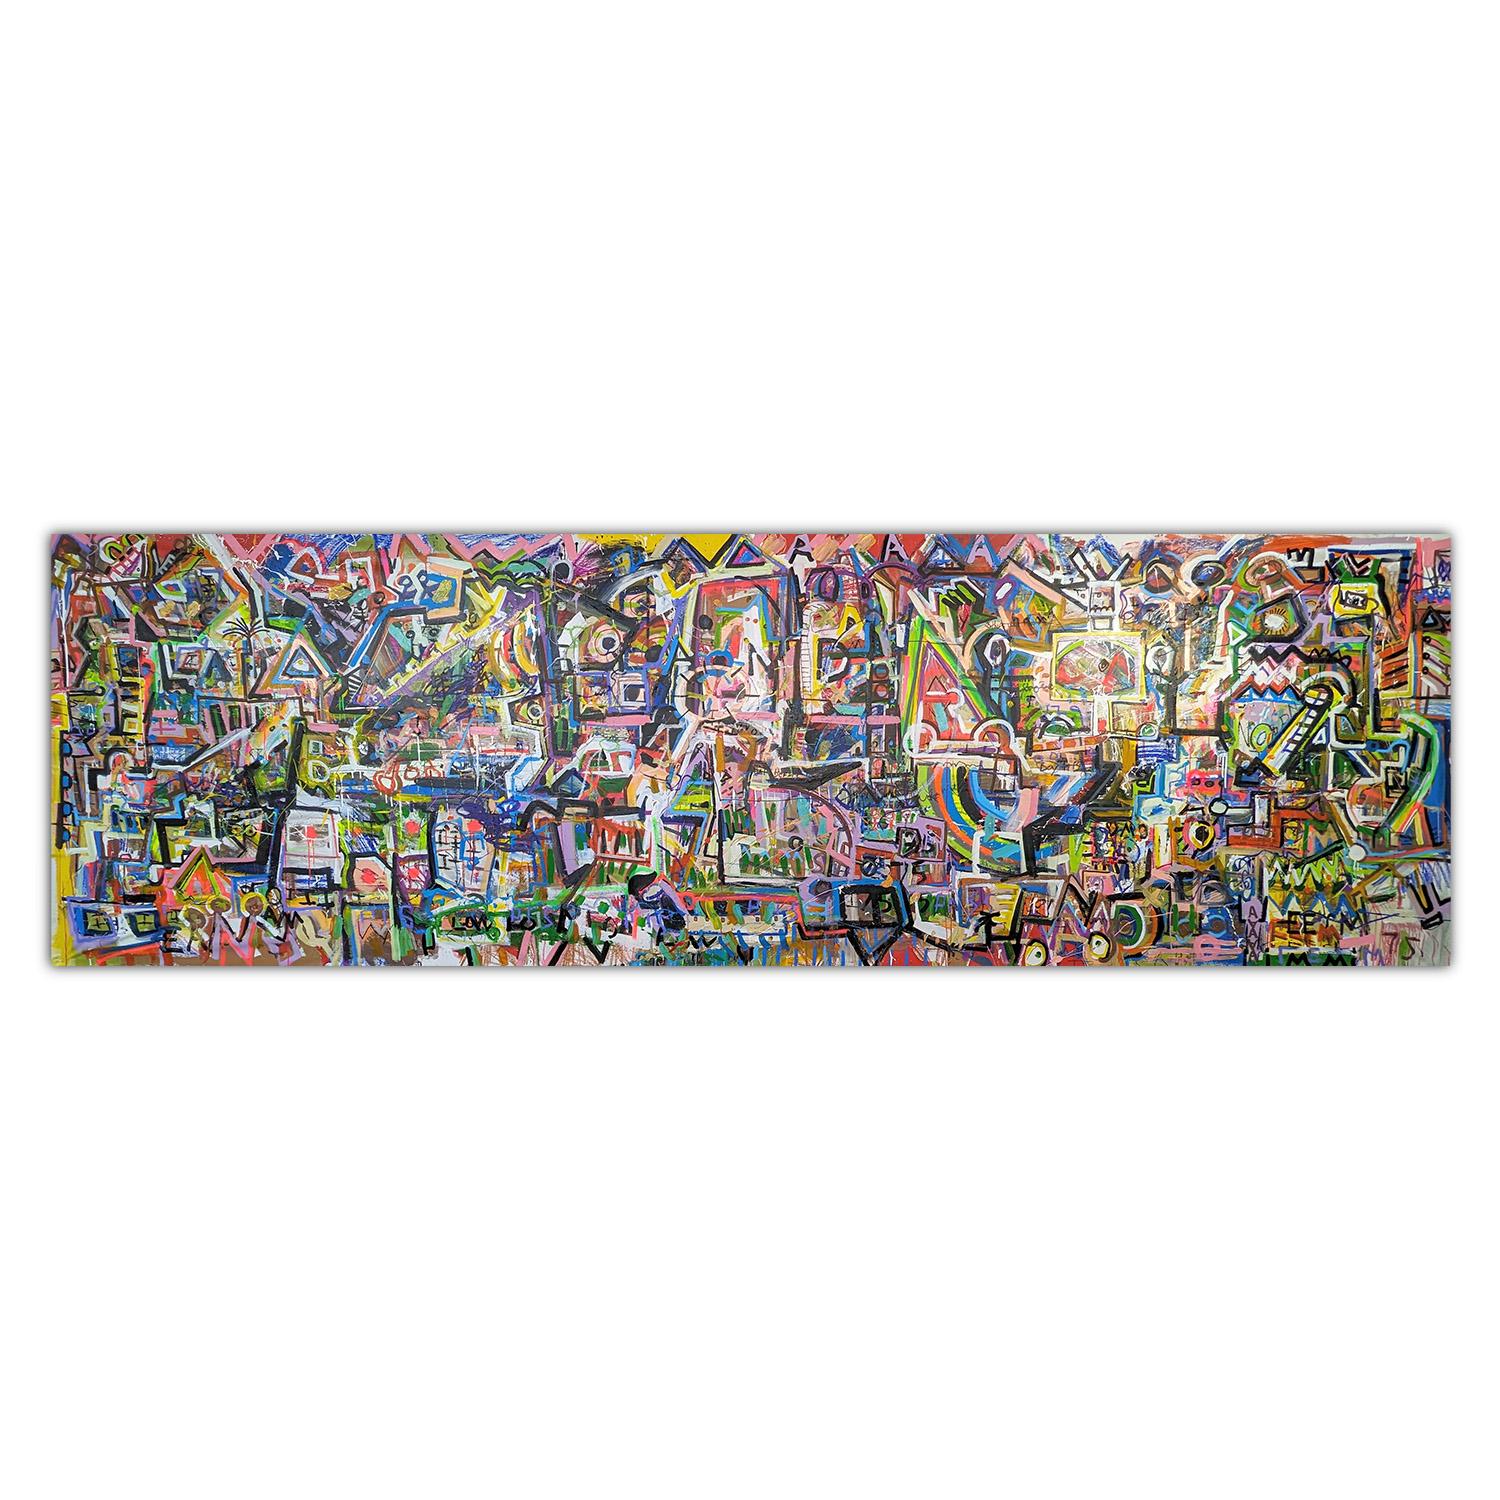 Elmhurst by Joseph Conrad-Ferm, 
H 48"x W 164"

Mixed medium painting on canvas by NY-based artist Joseph Conrad-Ferm.
"I set out to paint a timeline of my life and feel like I've captured it pretty well.tueres a great deal of text and simple line